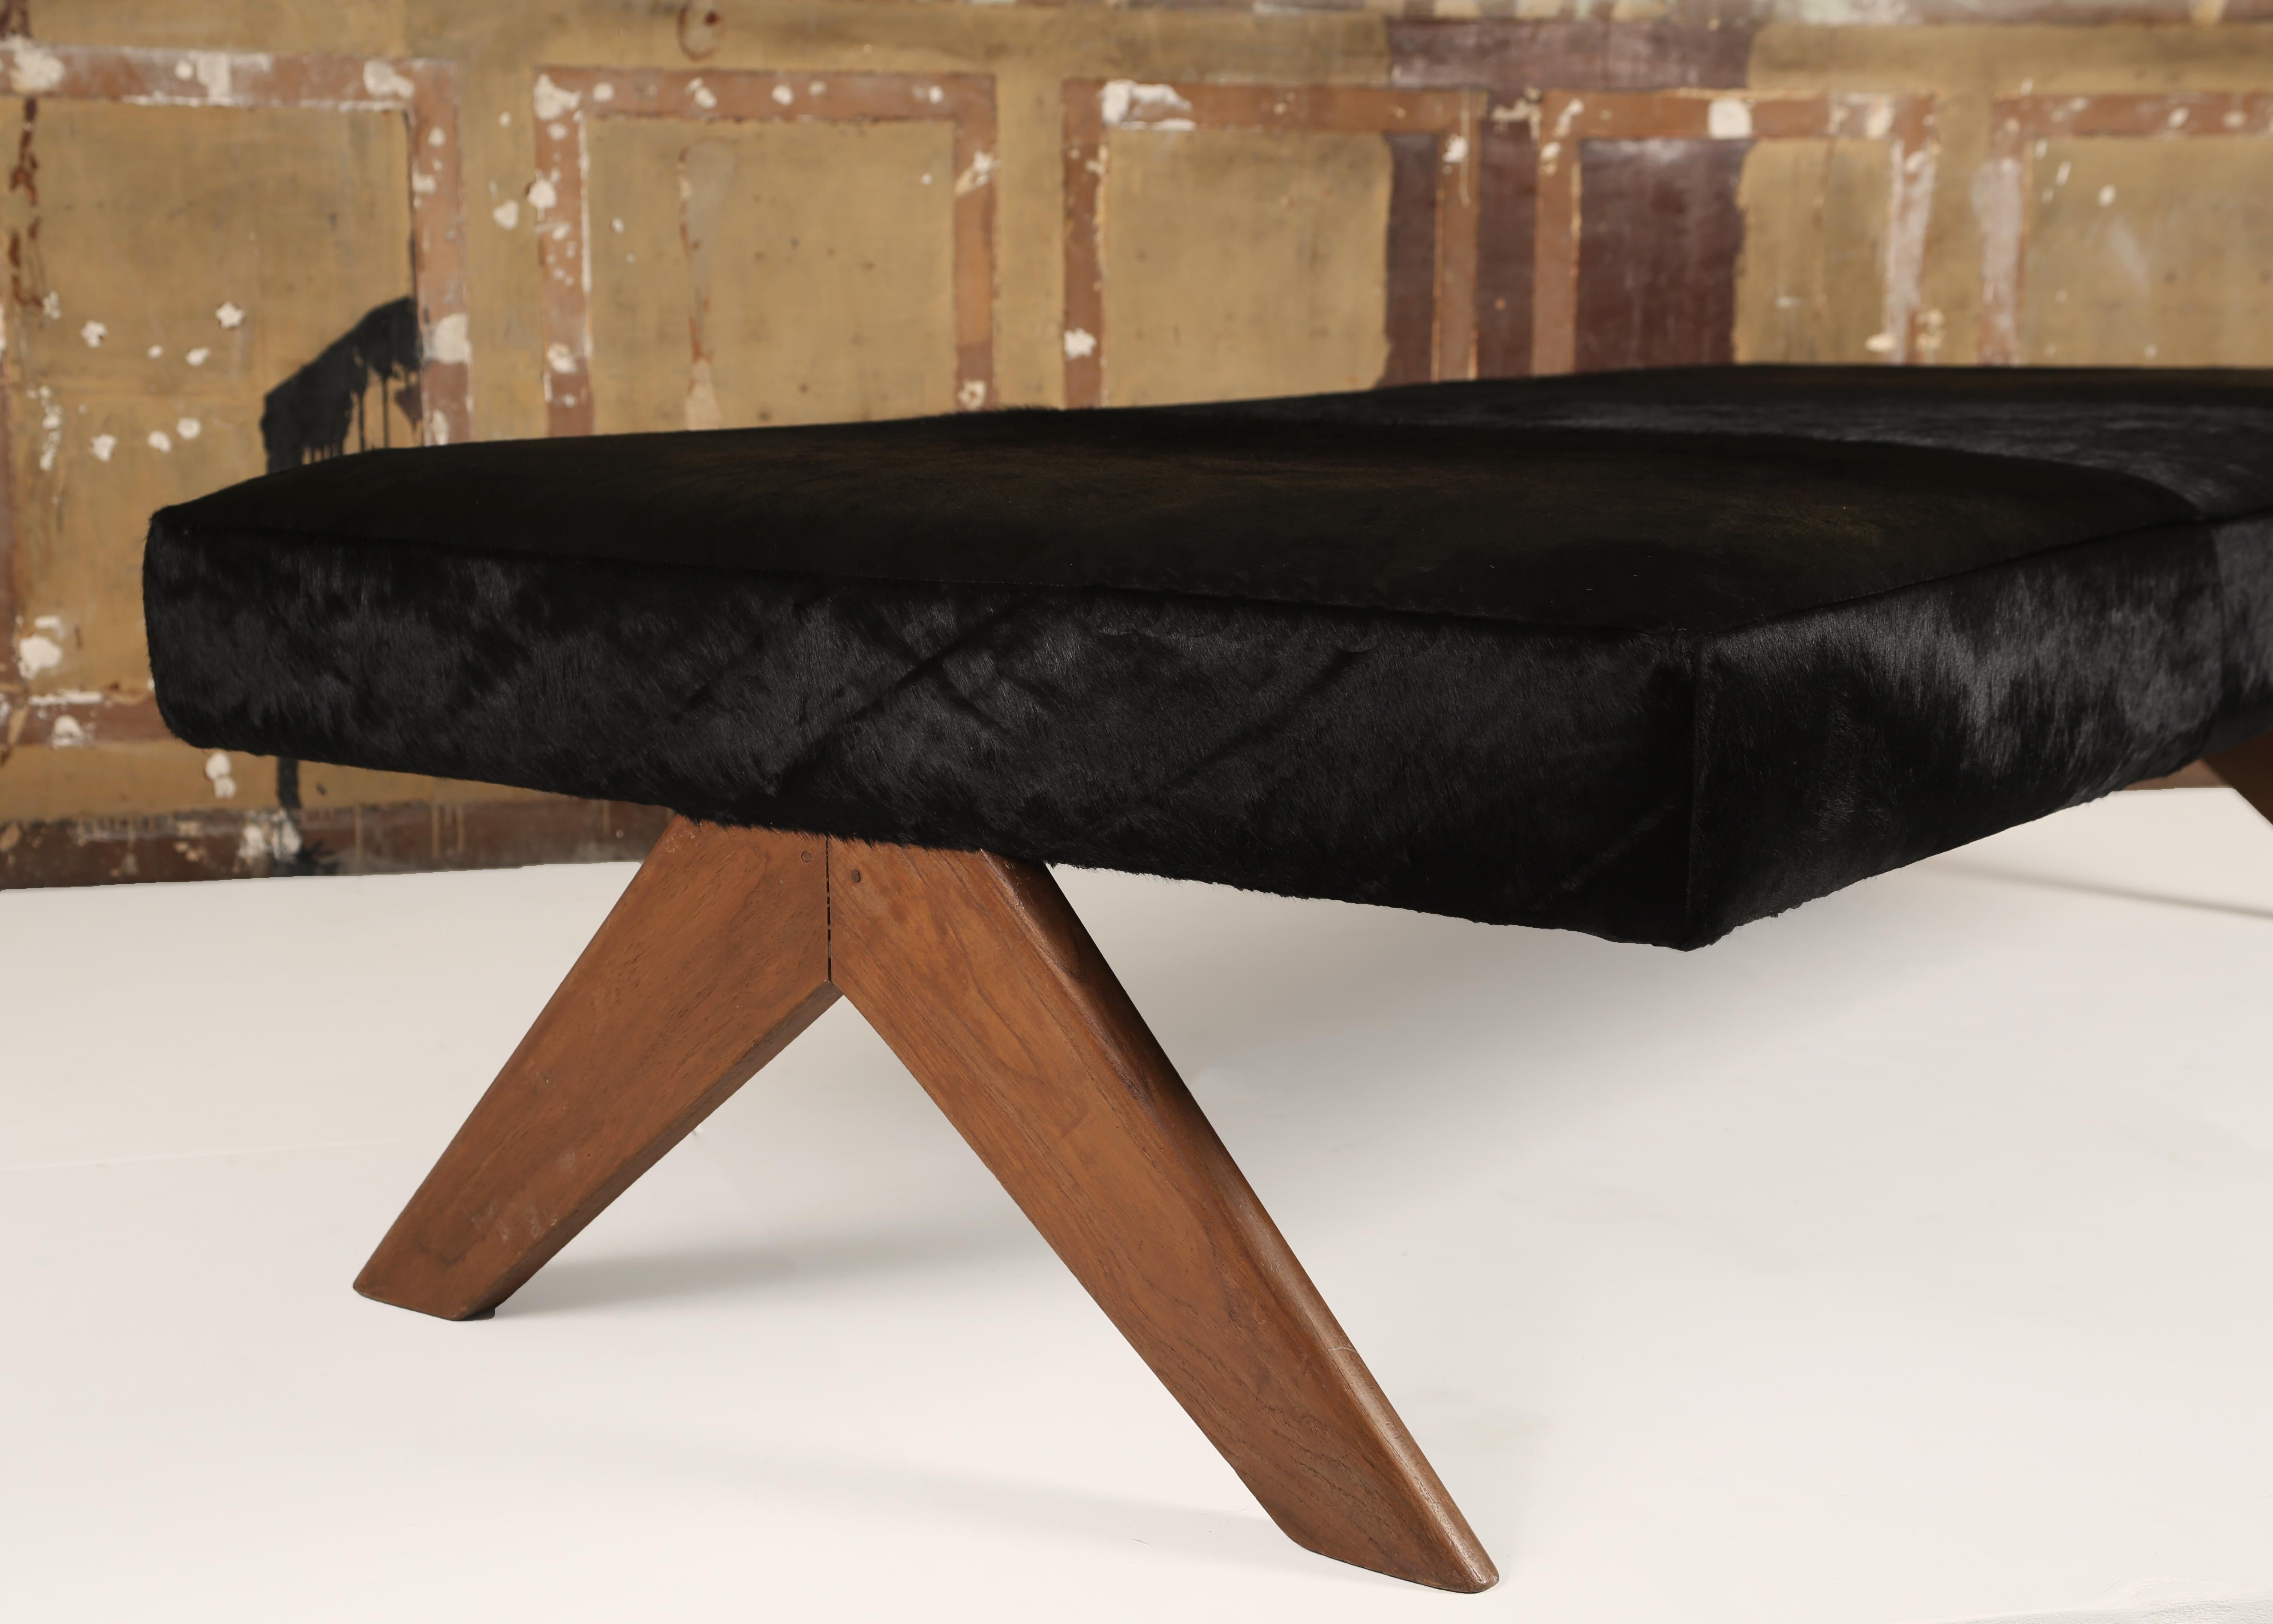 Pierre Jeanneret, (1896-1967),

Pierre Jeanneret a “Daybed”, PJ-L-12-A

Structured with teak and cowhide leather.

A piece of “Daybed” from low, high court, legislative assembly, and various administrative buildings in Chandigarh.